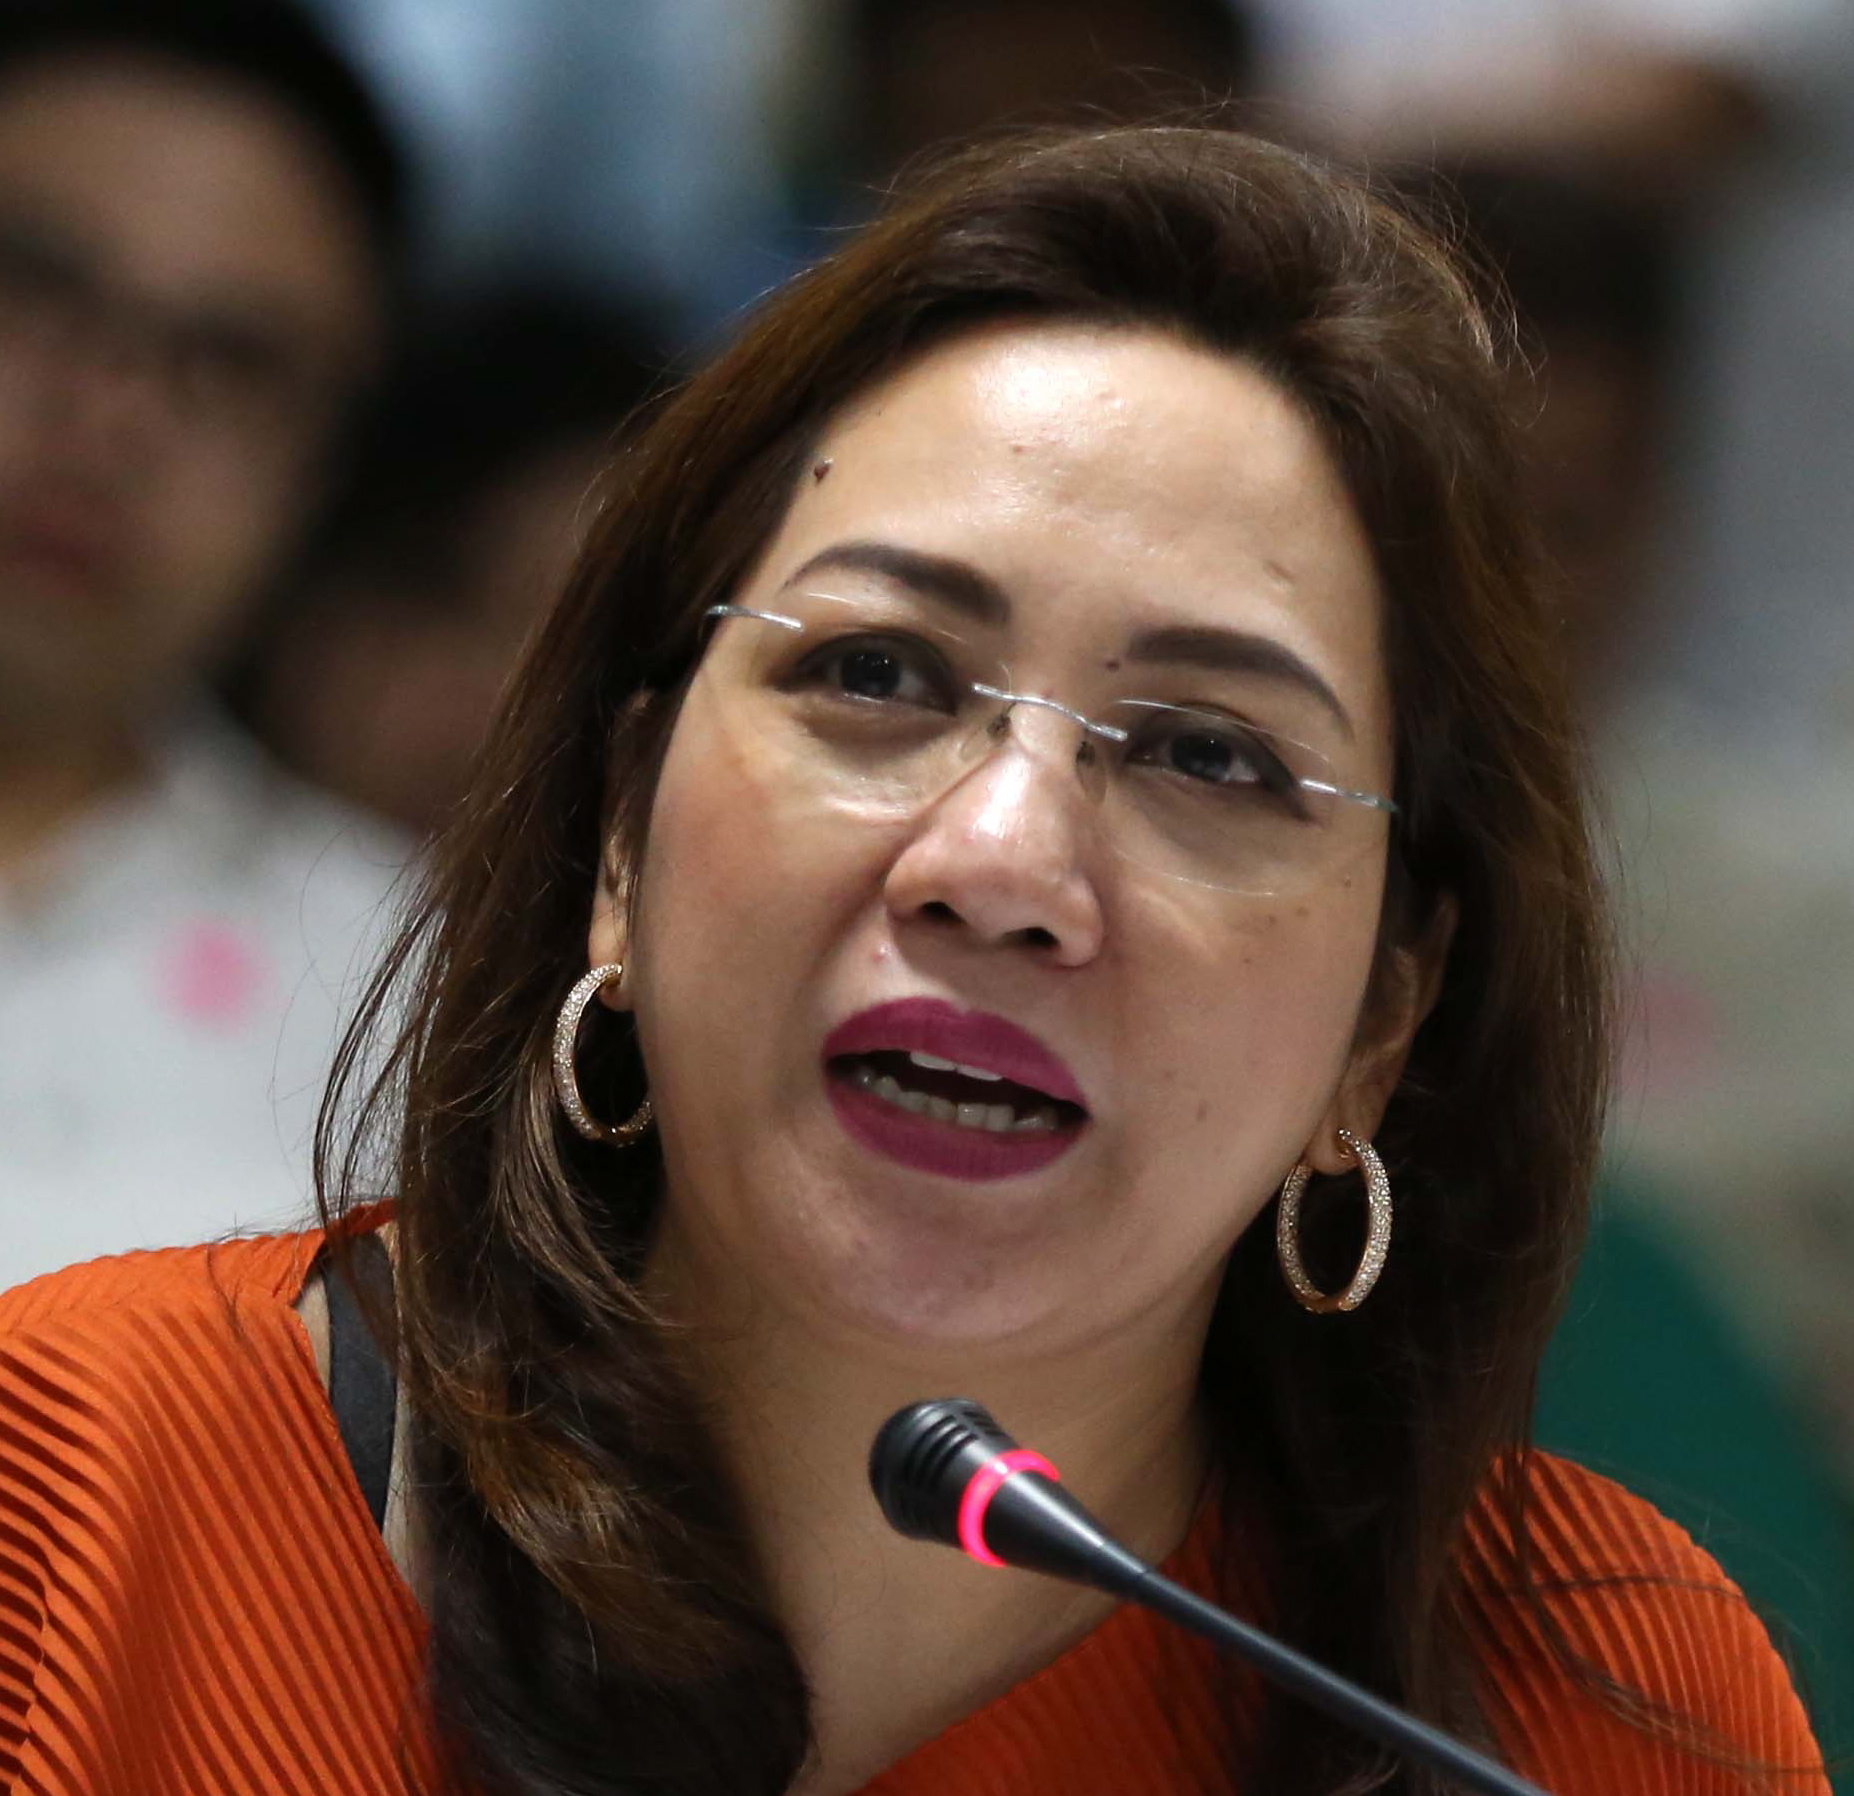 Former Health Secretary and Iloilo 1st District Rep. Janette Garin blamed low vaccination rates for the rise in pertussis or whooping cough cases across the country, as she urged the public to take necessary precautions.